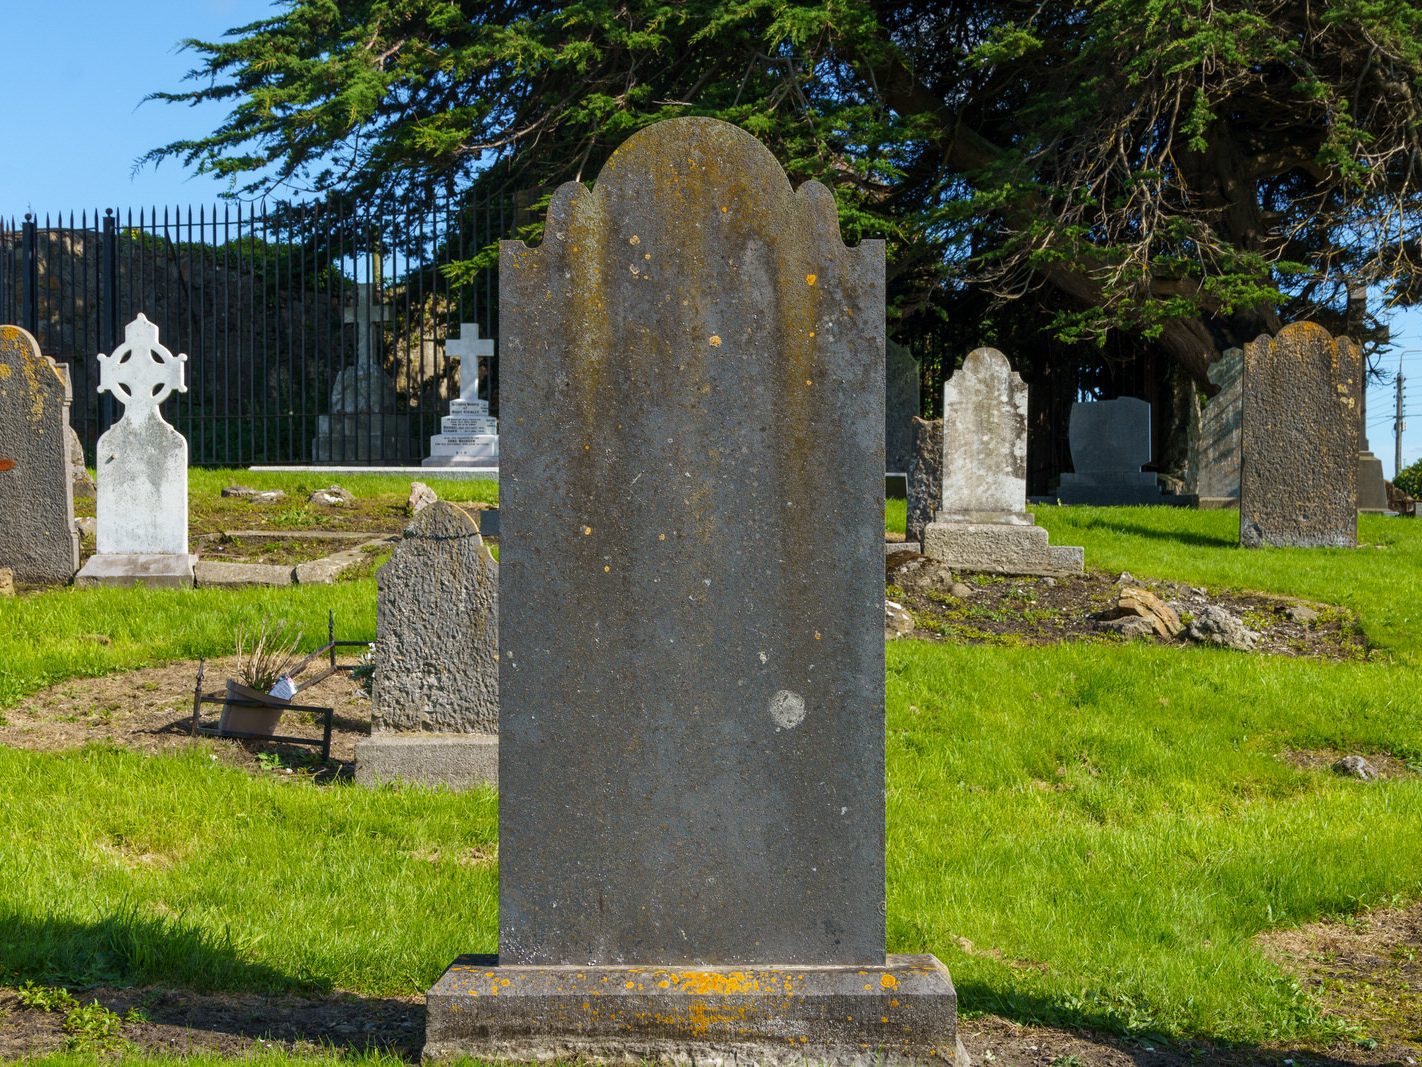 TODAY I MANAGED TO VISIT KILBARRACK CEMETERY [AFTER A NUMBER OF FAILED ATTEMPTS OVER A PERIOD OF TEN YEARS] 004